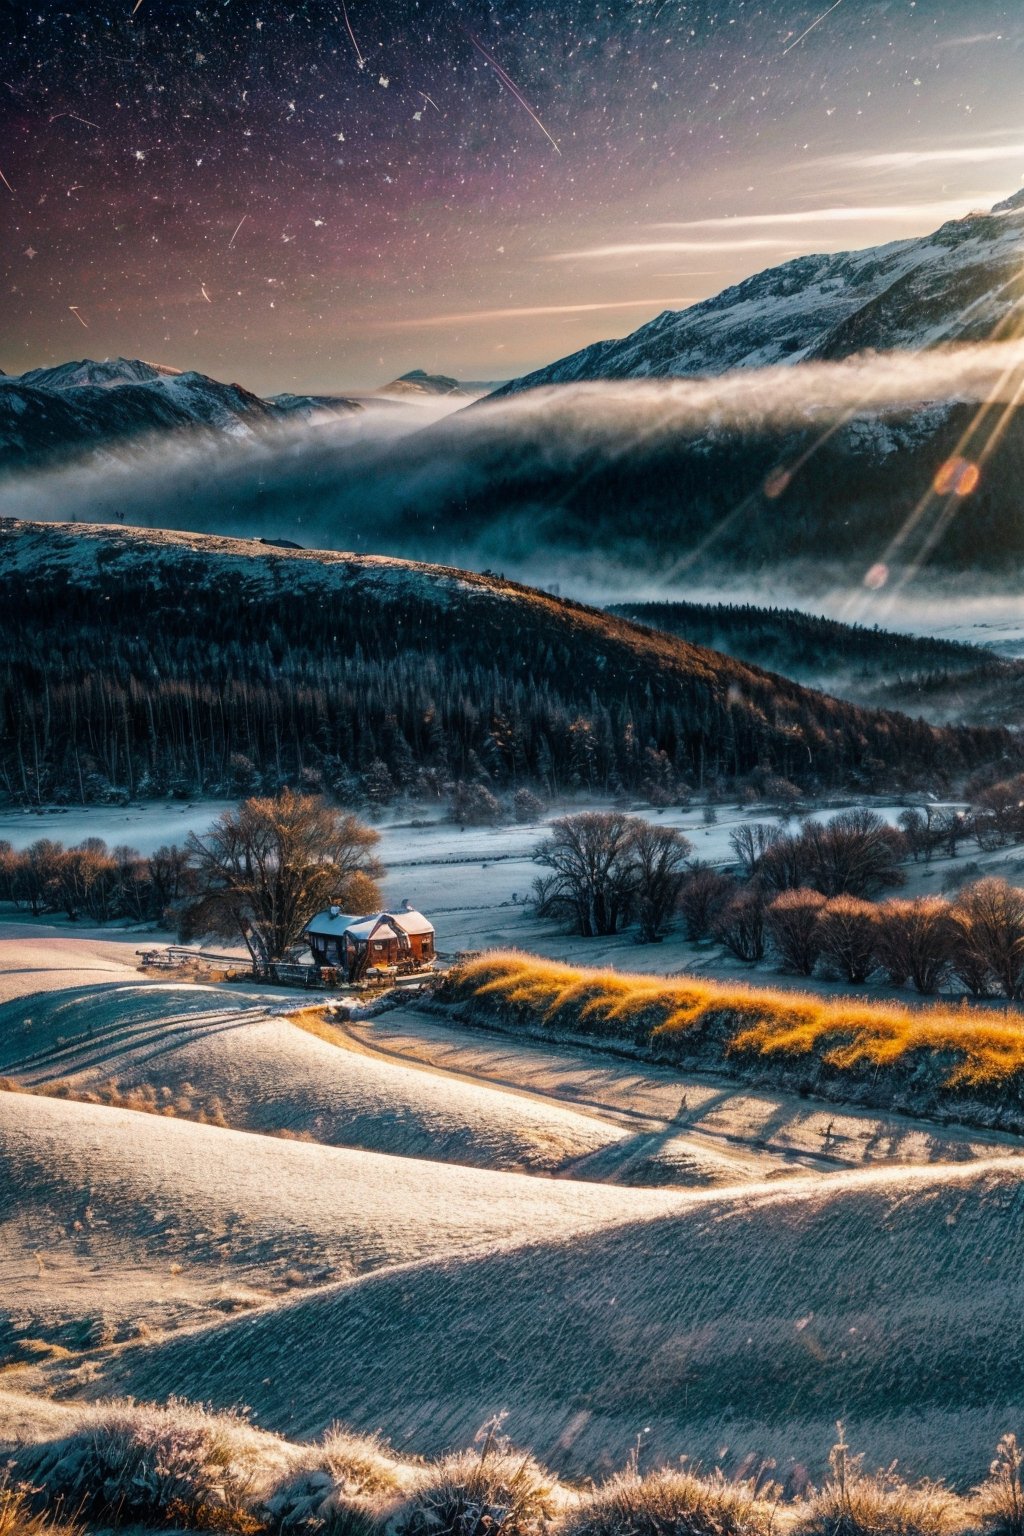 Imagine a vast, serene valley enveloped in snow by the soft, golden light of dawn. The sun, just above the horizon, casts a warm glow over the snowy scene. In the foreground, a river of crystal-clear frozen water meanders gently through the valley, reflecting the pastel tones of the sky. Its banks are adorned with lush, vibrant green grass and sporadic wild trees in a snowy Christmas look, from deep blues and purples to bright yellows and pinks. In the middle distance, there are hills covered in snow by a patchwork of wild meadows and small, picturesque snowy farms. The farms have charming wooden fences and old stone cottages with smoke gently rising from their chimneys. The meadows are snow-covered and dotted with grazing animals: sheep, horses and a few cows, adding life and movement to the scene. The background is dominated by majestic mountains, ((( flown with his sleigh and reindeer SANTA CLAUS following a shooting star))) with their peaks covered in glistening snow, which ((contrast with the dark, steep rocks)) below . The mountains are partially shrouded in light fog, which adds a sense of mystery and depth to the scene. Above, the sky is a stunning canvas of color: soft blues, pinks and oranges, with a few wispy clouds lazily passing by. The overall feeling is one of peace, tranquility and the stunning beauty of nature, captured in a high-resolution, wide-angle photography style. Your camera settings should focus on a large depth of field to ensure that every detail of this picturesque landscape is captured clearly.